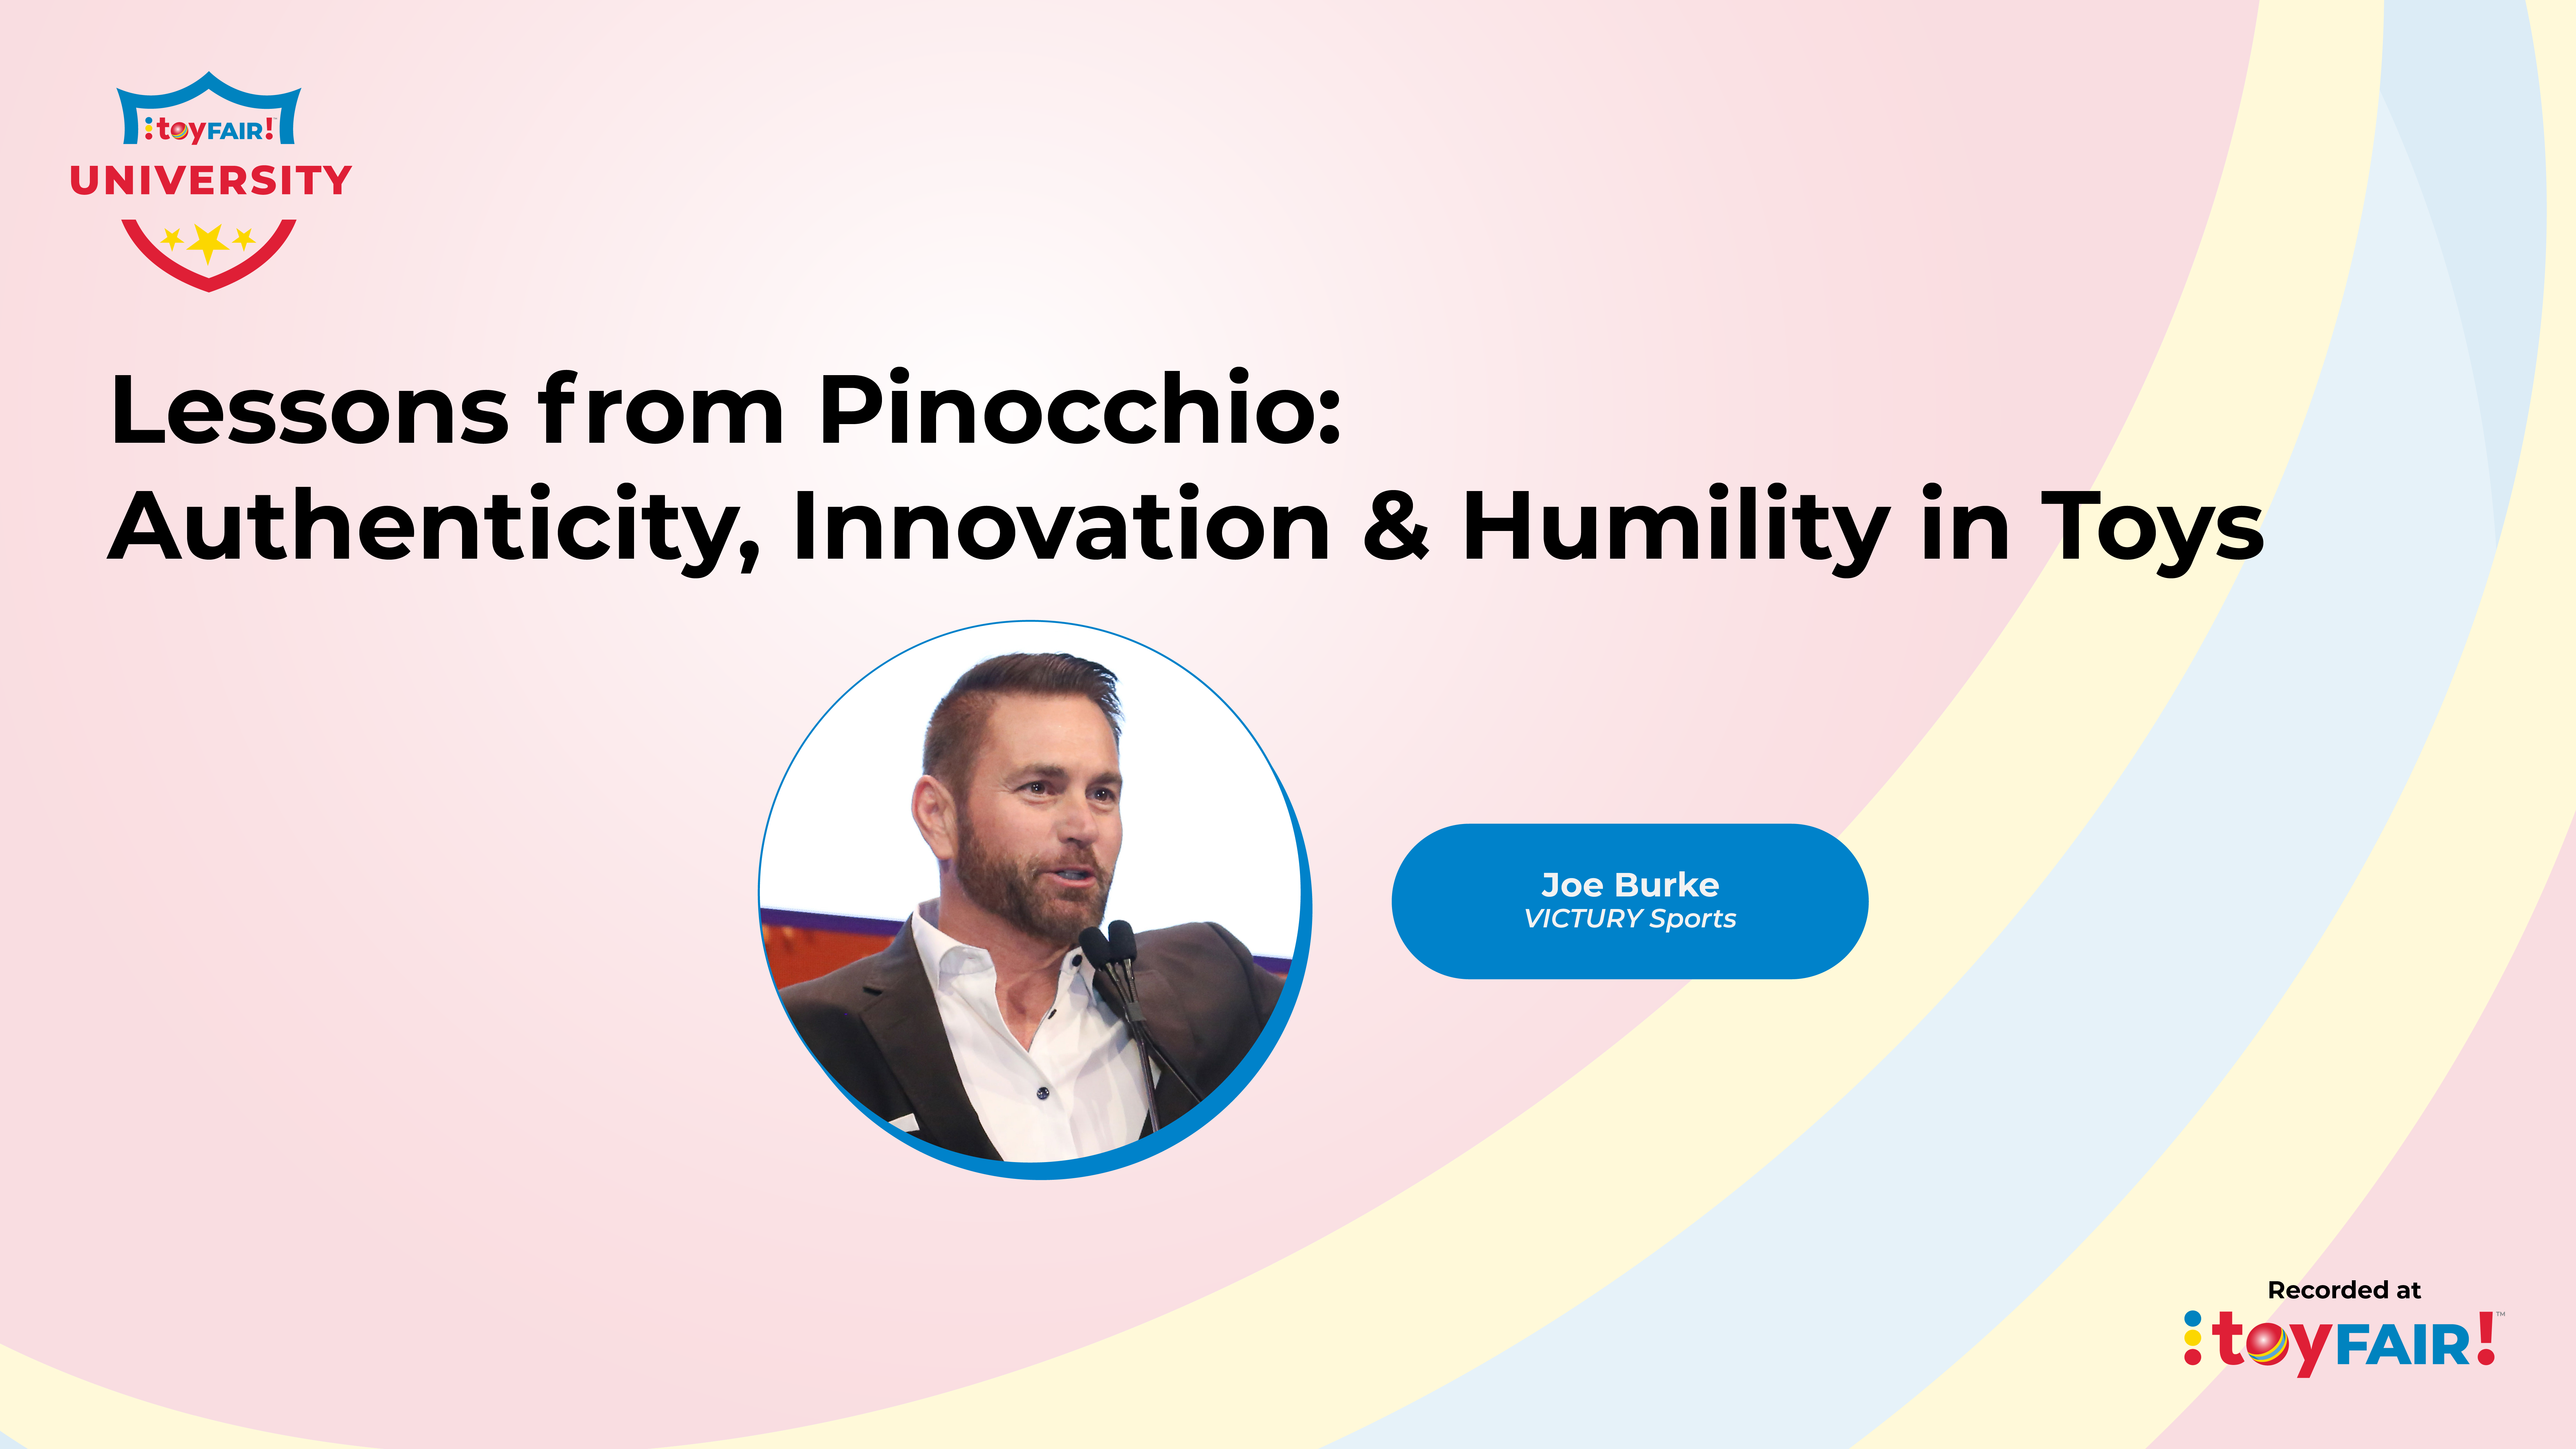 Lessons from Pinocchio: Authenticity, Innovation & Humility in Toys